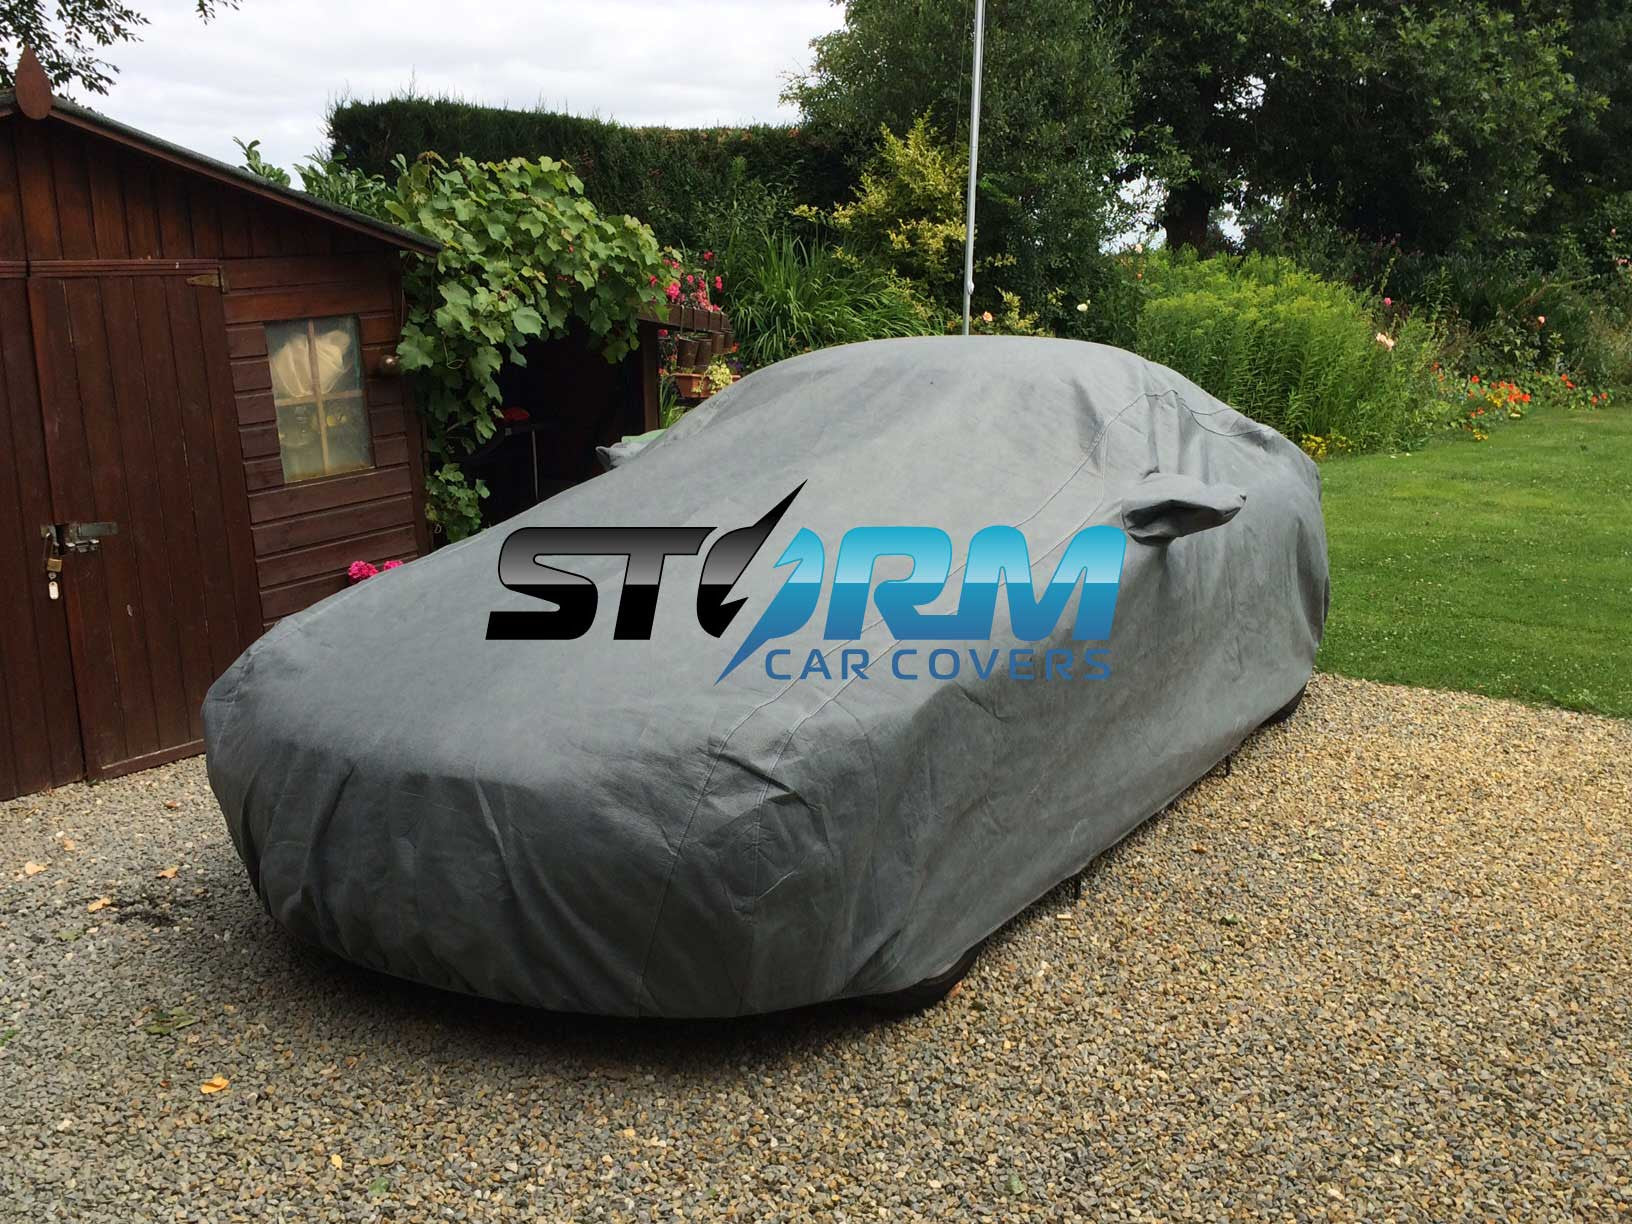 BMW Outdoor Car Covers  Tailored To Your Model & Year - Storm Car Covers